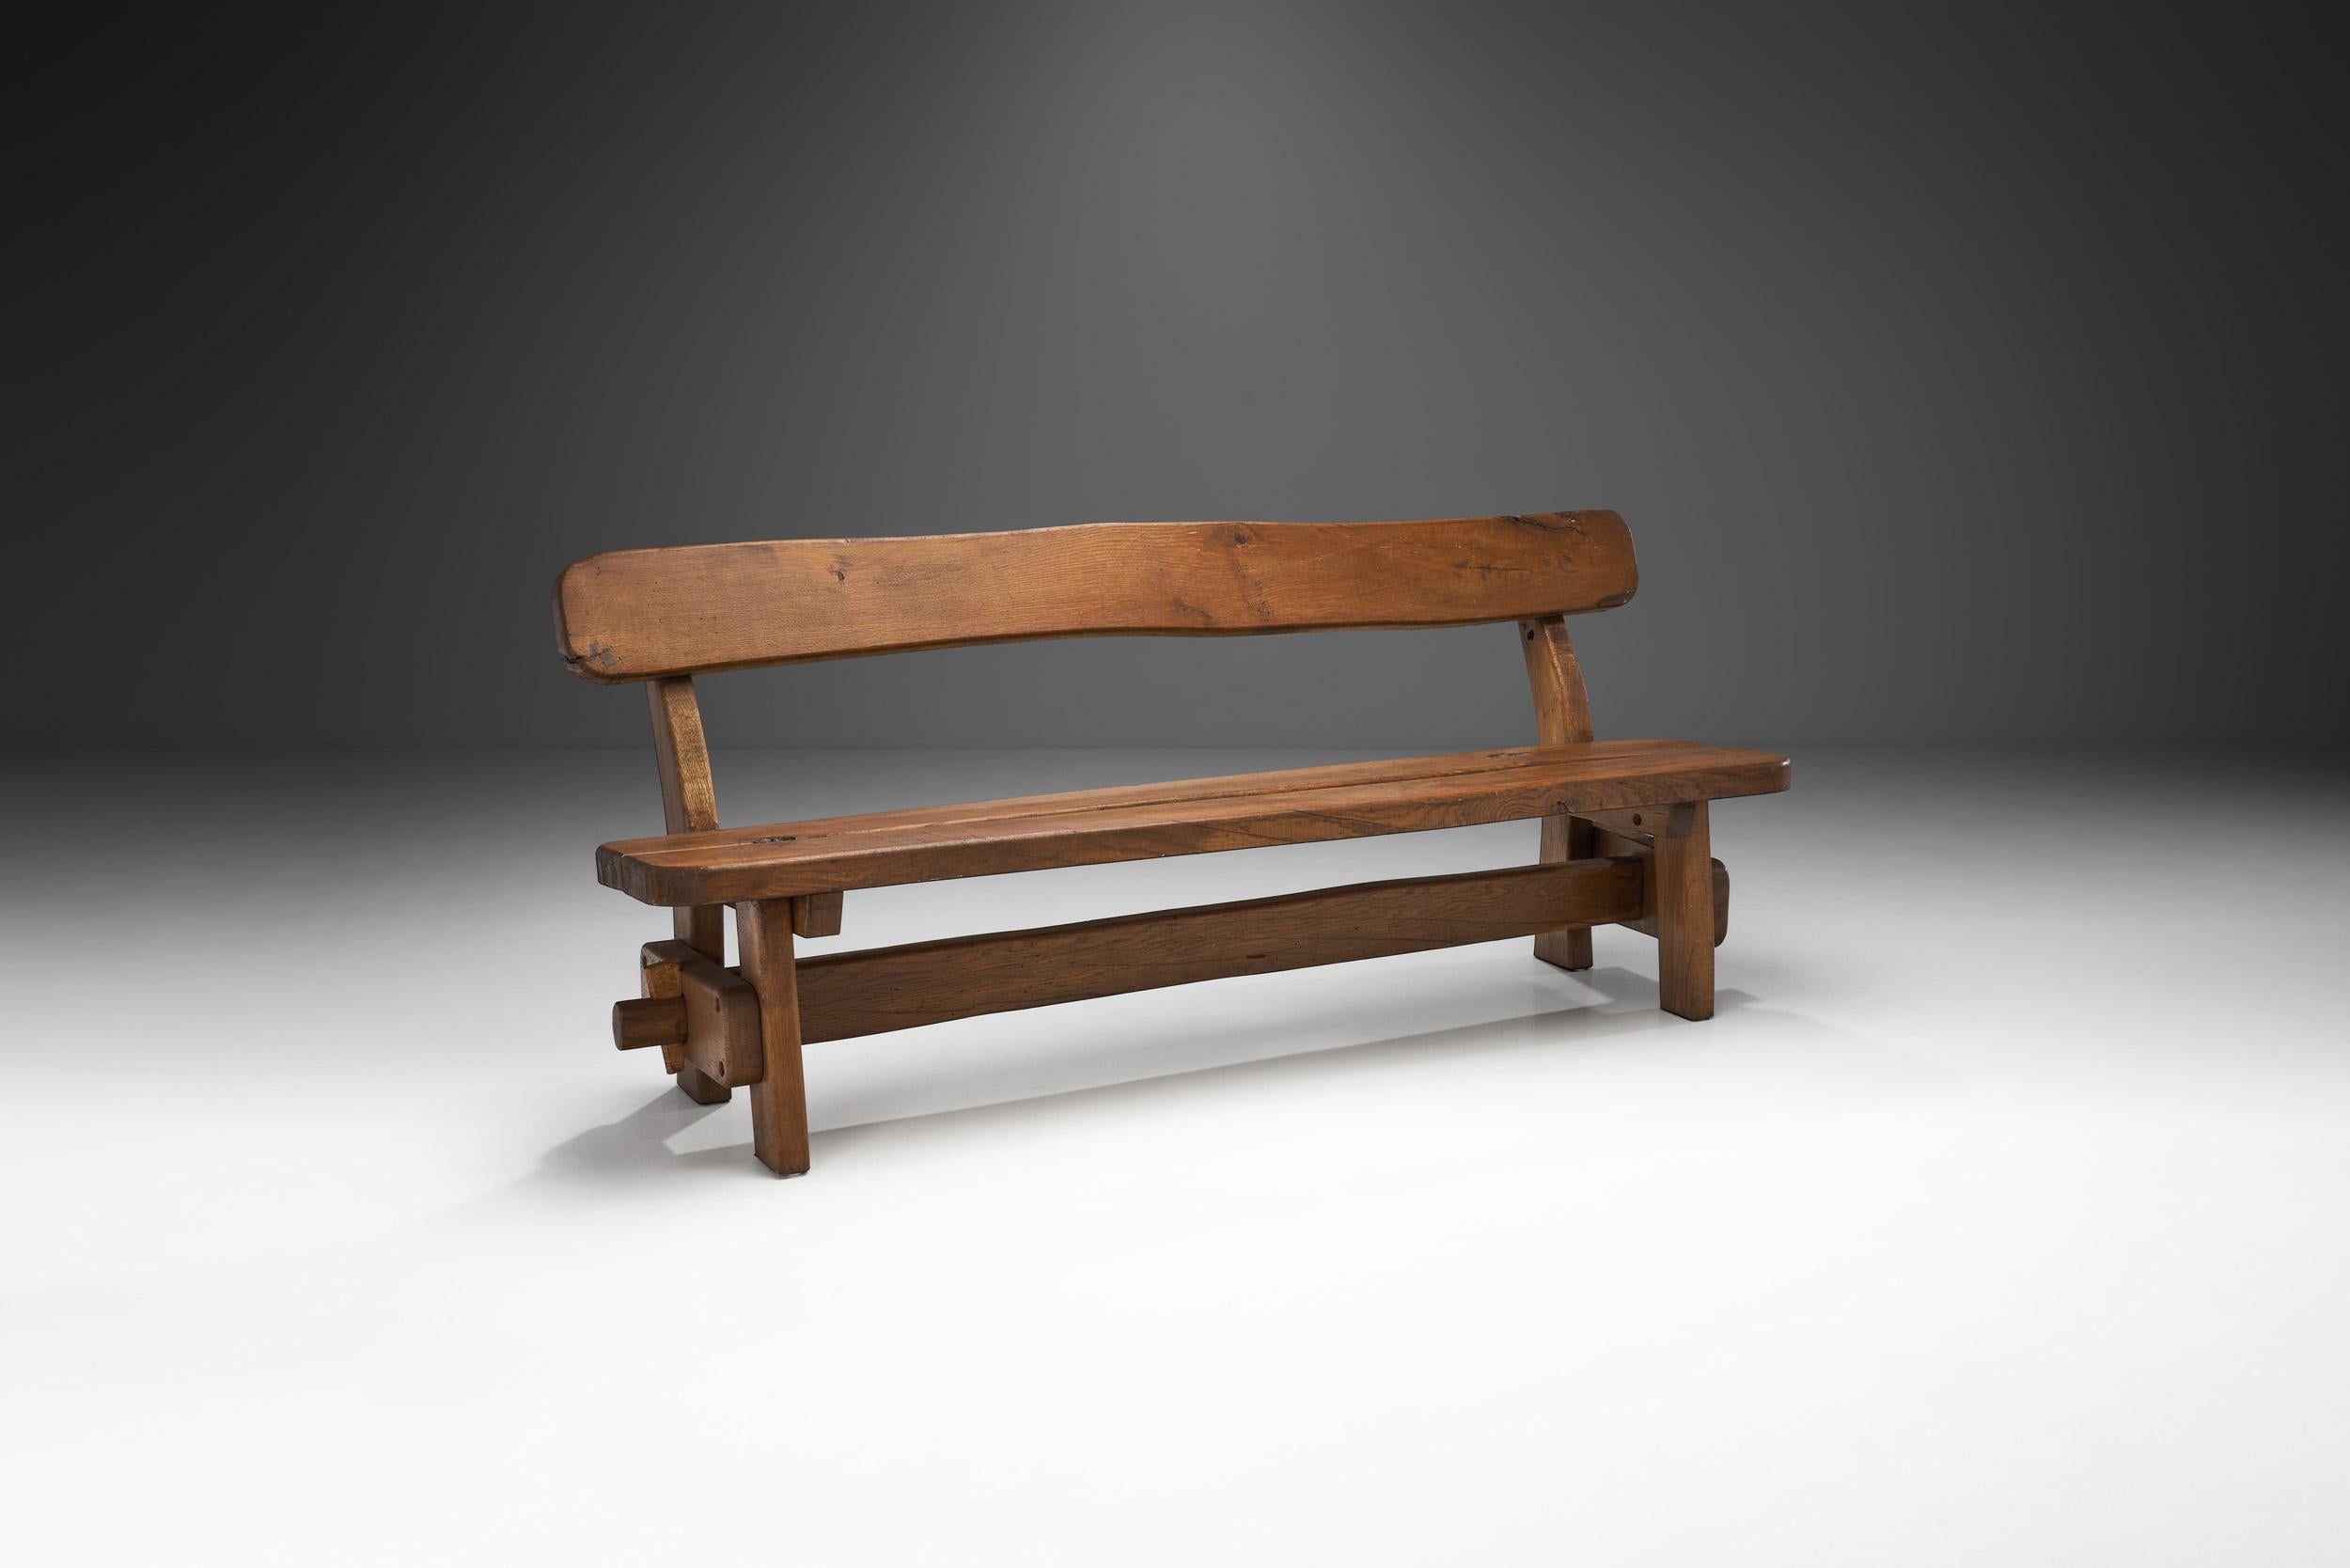 In the past year, seating benches have become a popular choice in home décor. Of course, these benches’ primary purpose is to provide a convenient and comfortable place to sit. However, a bench, such as this beautiful wooden model, can also be used